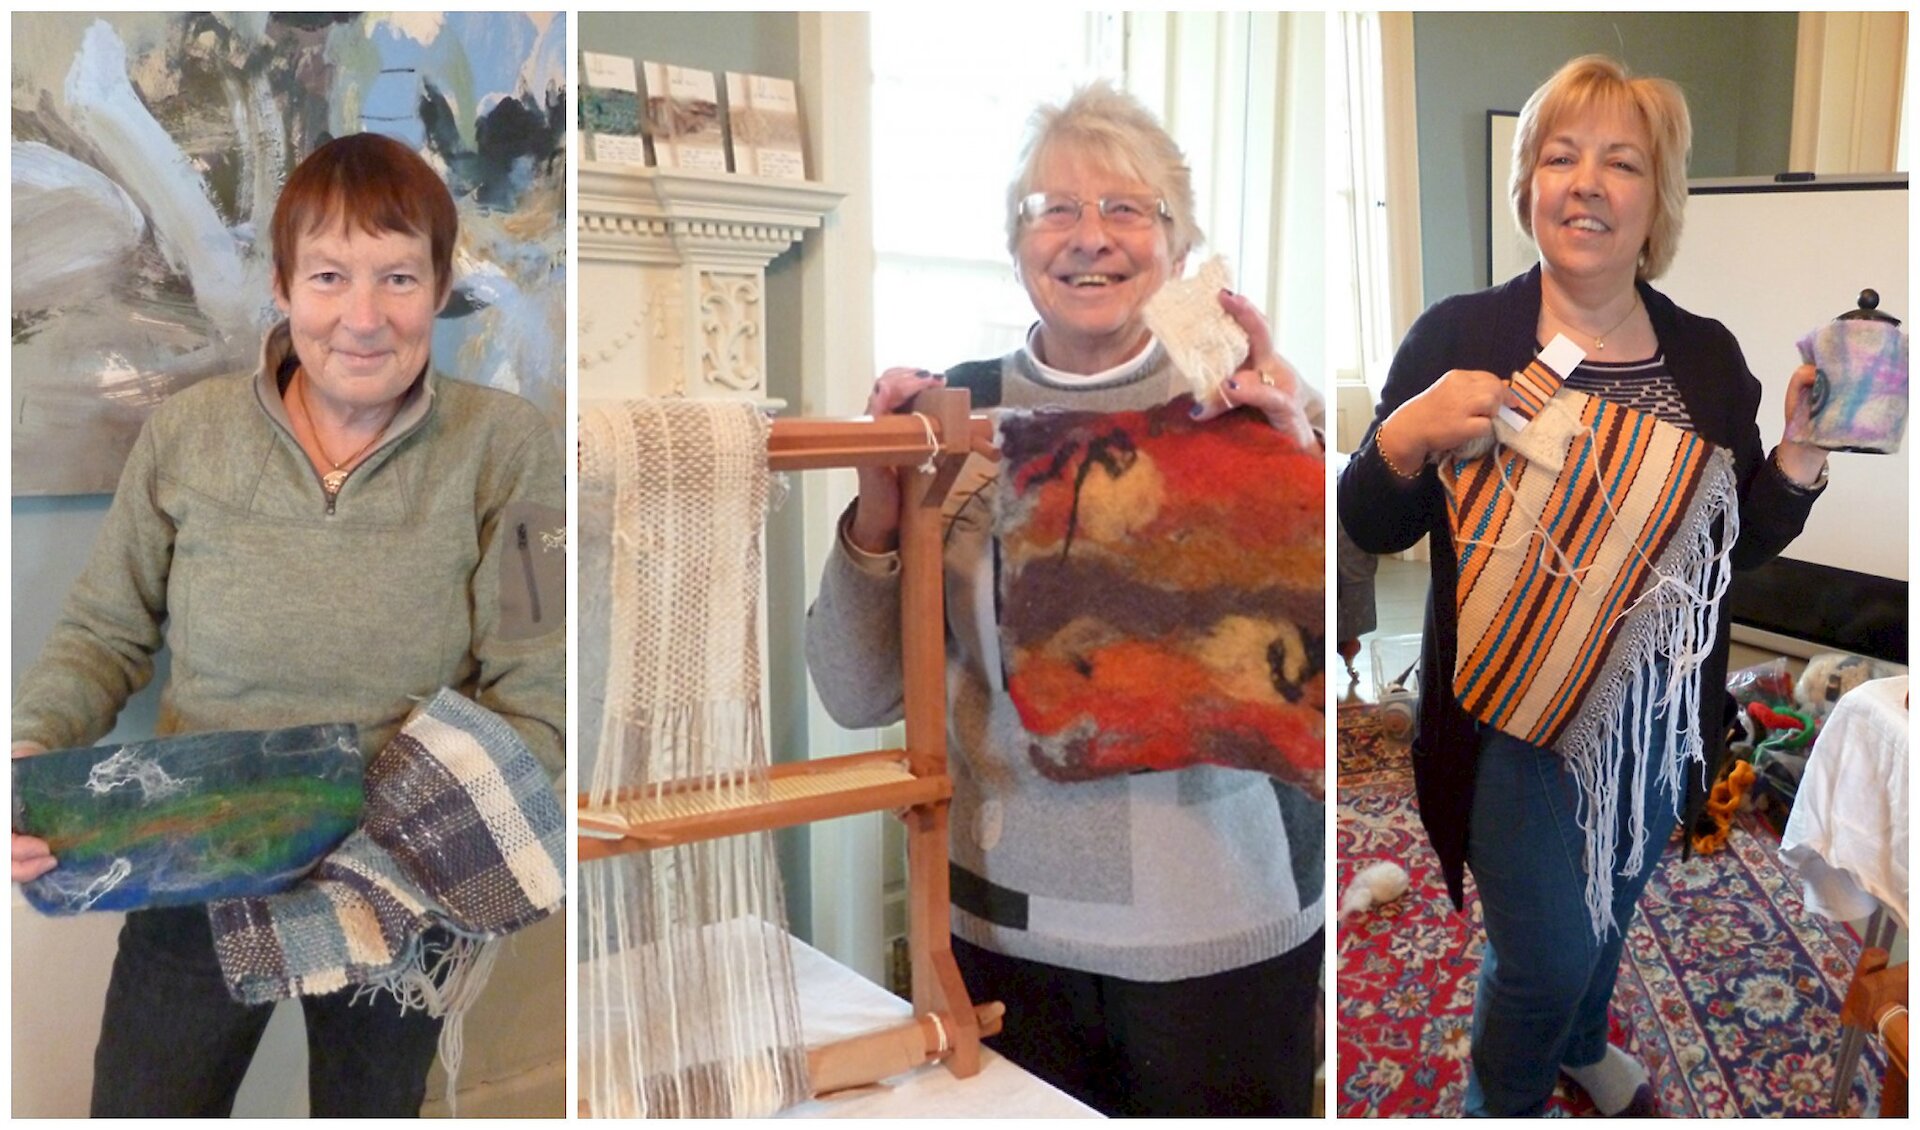 Penny, Pauline and Gill with their weaving and felt creations.